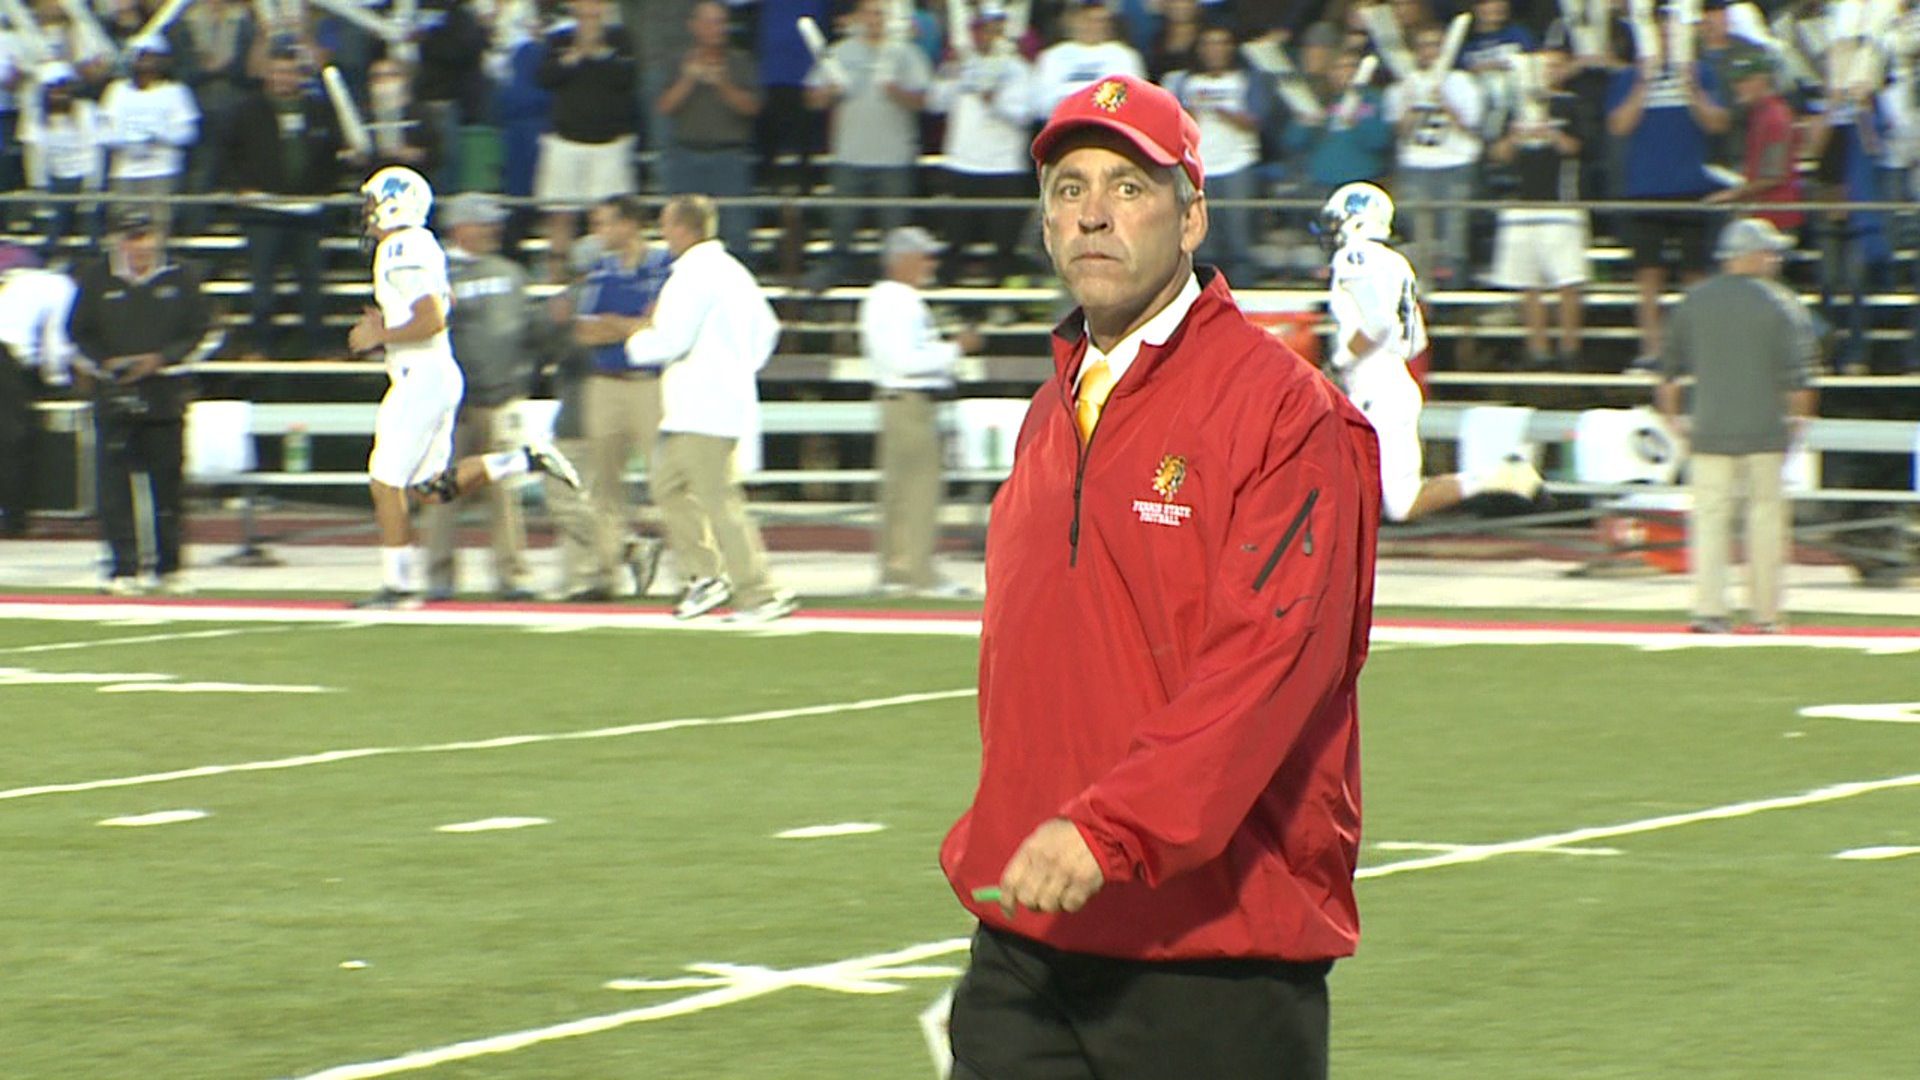 Ferris State football coach Tony Annese has been suspended because his players smoked a cigar in the locker room